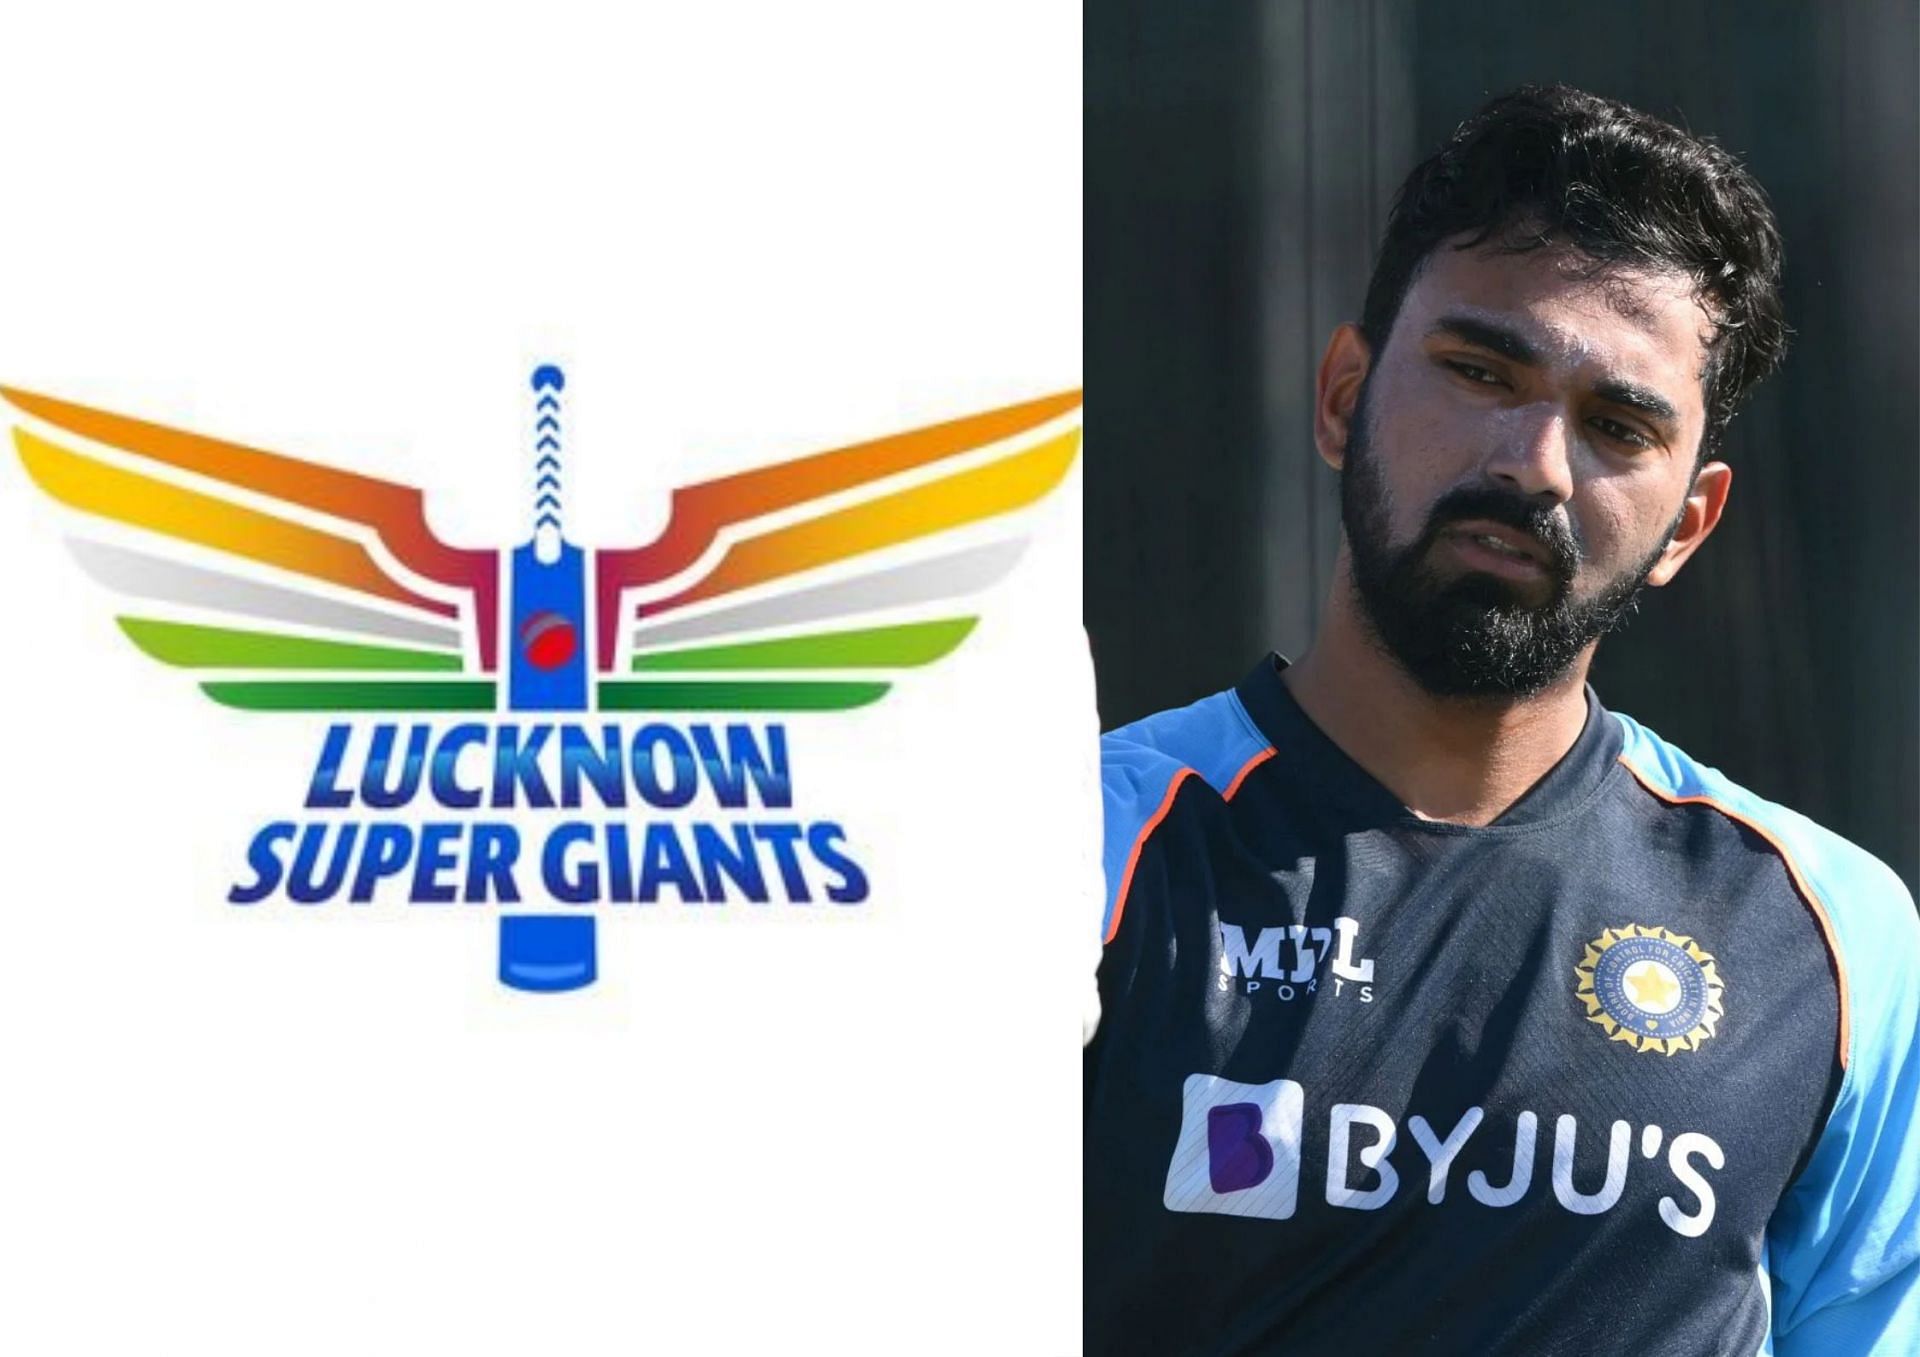 Lucknow Super Giants will debut under the captaincy of KL Rahul in IPL 2022 (Picture Credits: Twitter/ LSG; Getty Images).